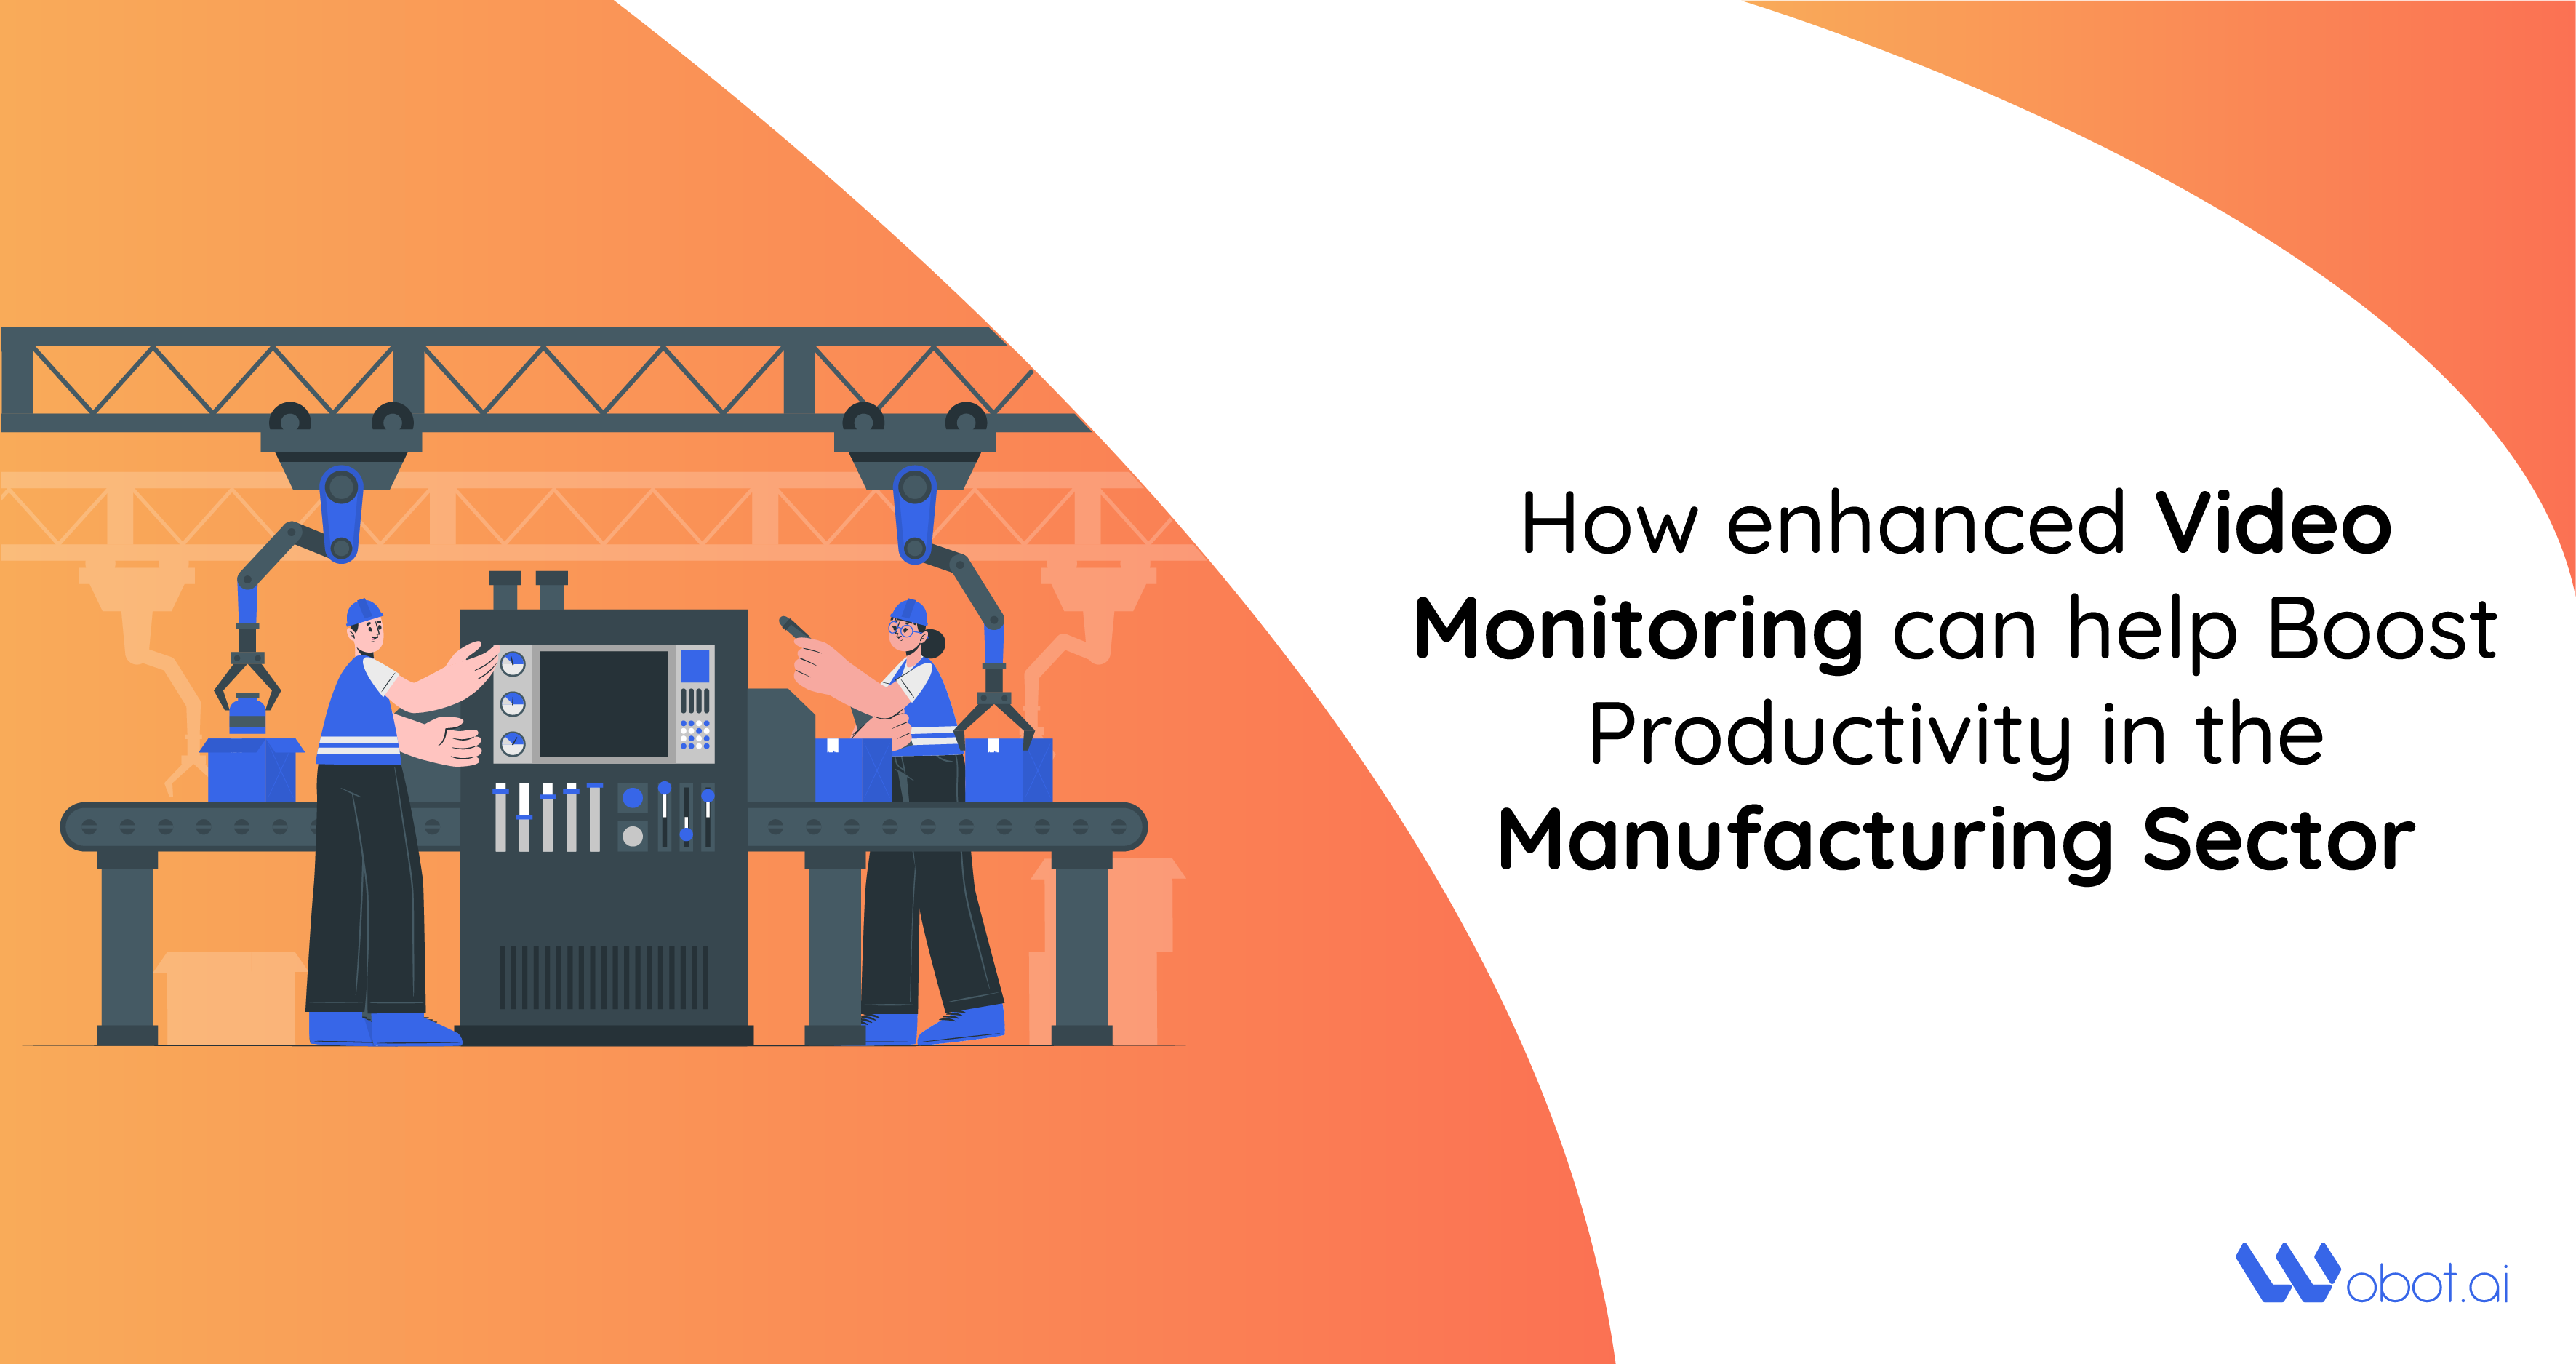 How enhanced Video Monitoring can help Boost Productivity in the Manufacturing Sector